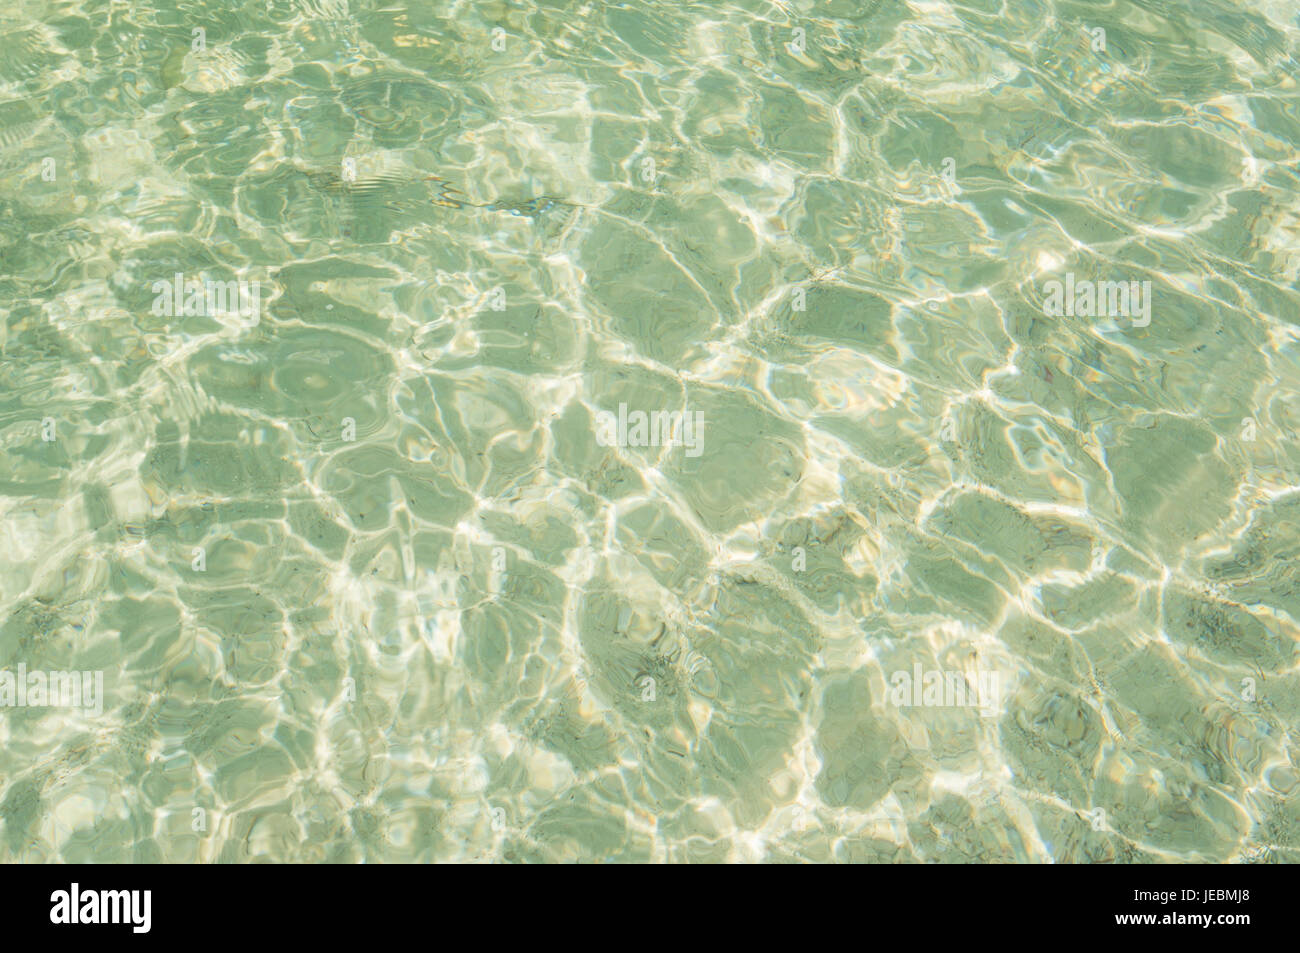 Abstract background wallpaper effect of water rippling over sand in tropical ocean lagoon Stock Photo